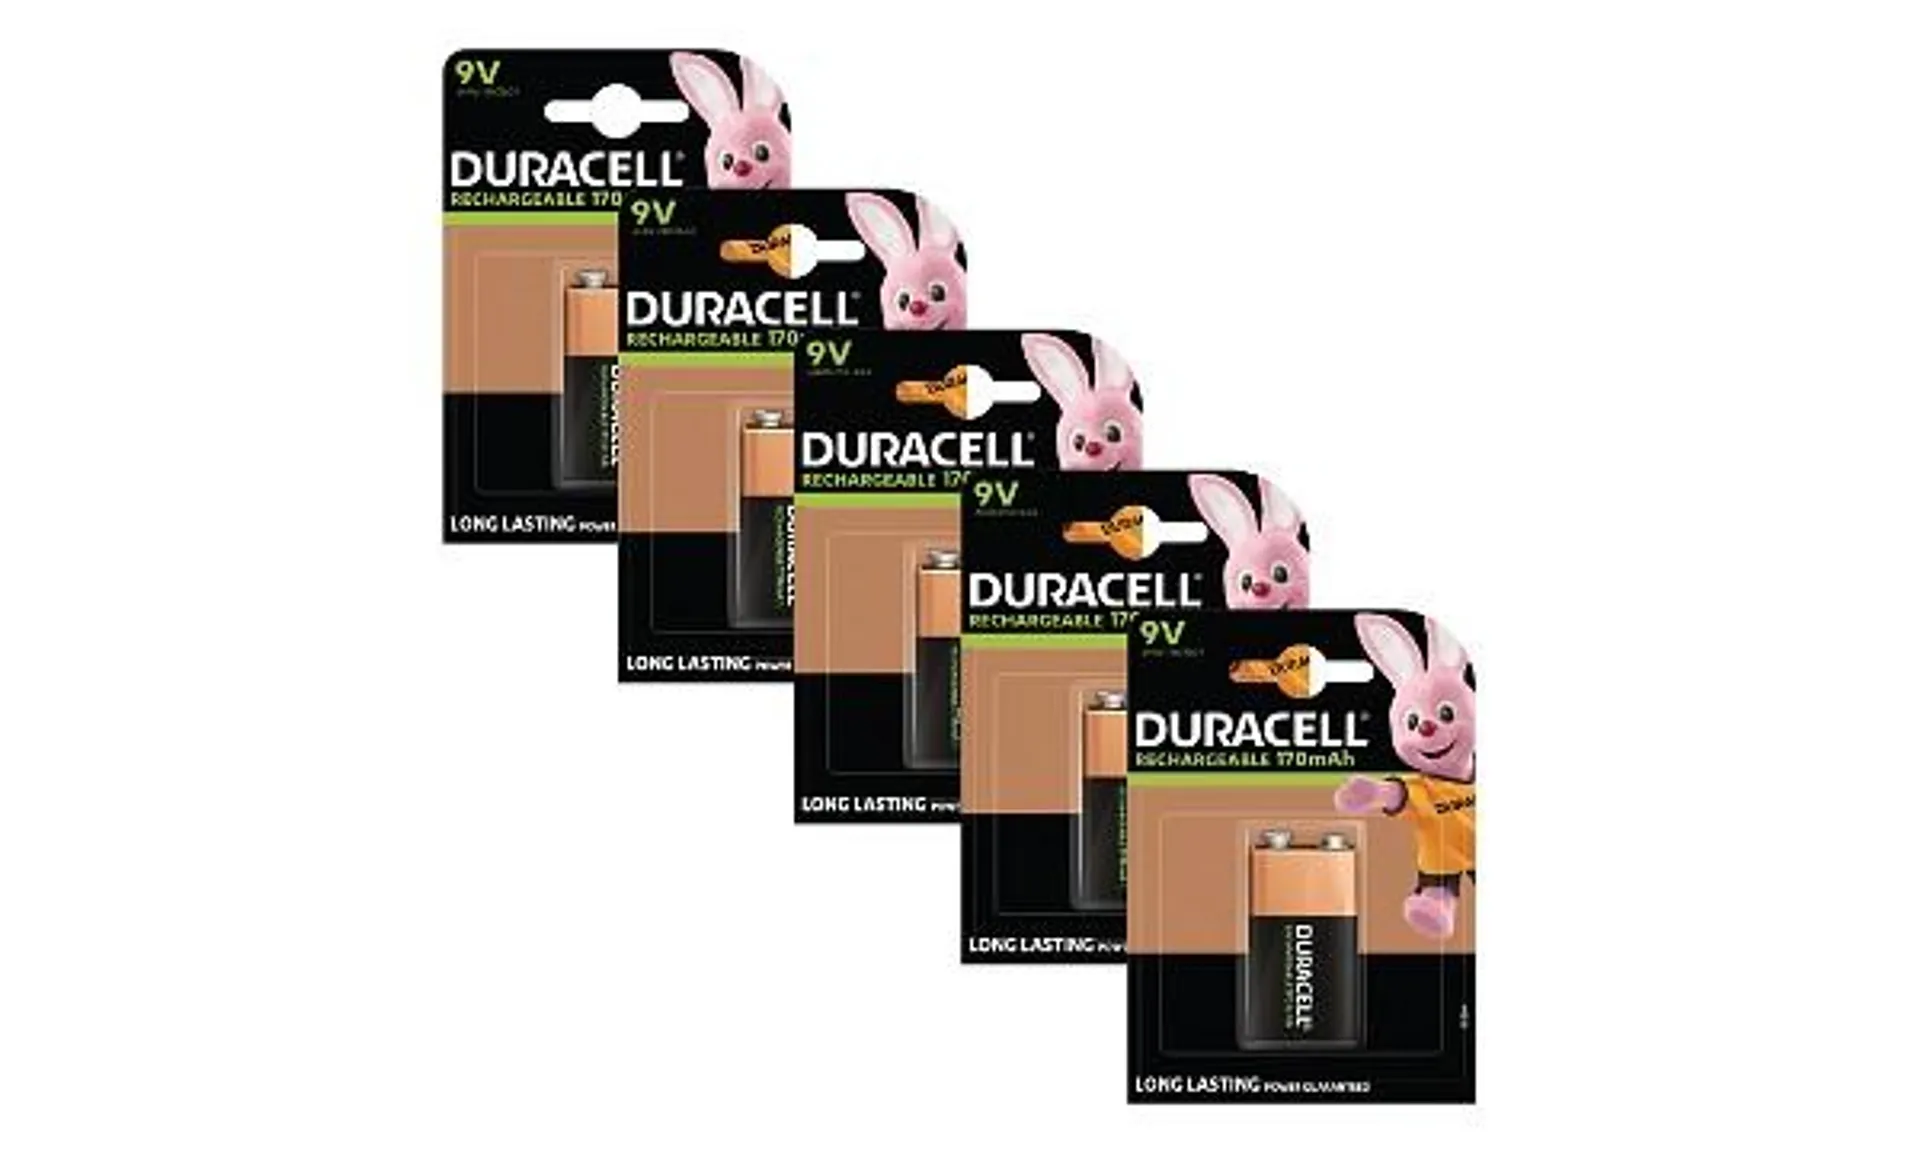 Duracell Rechargeable 9v 5 Pack